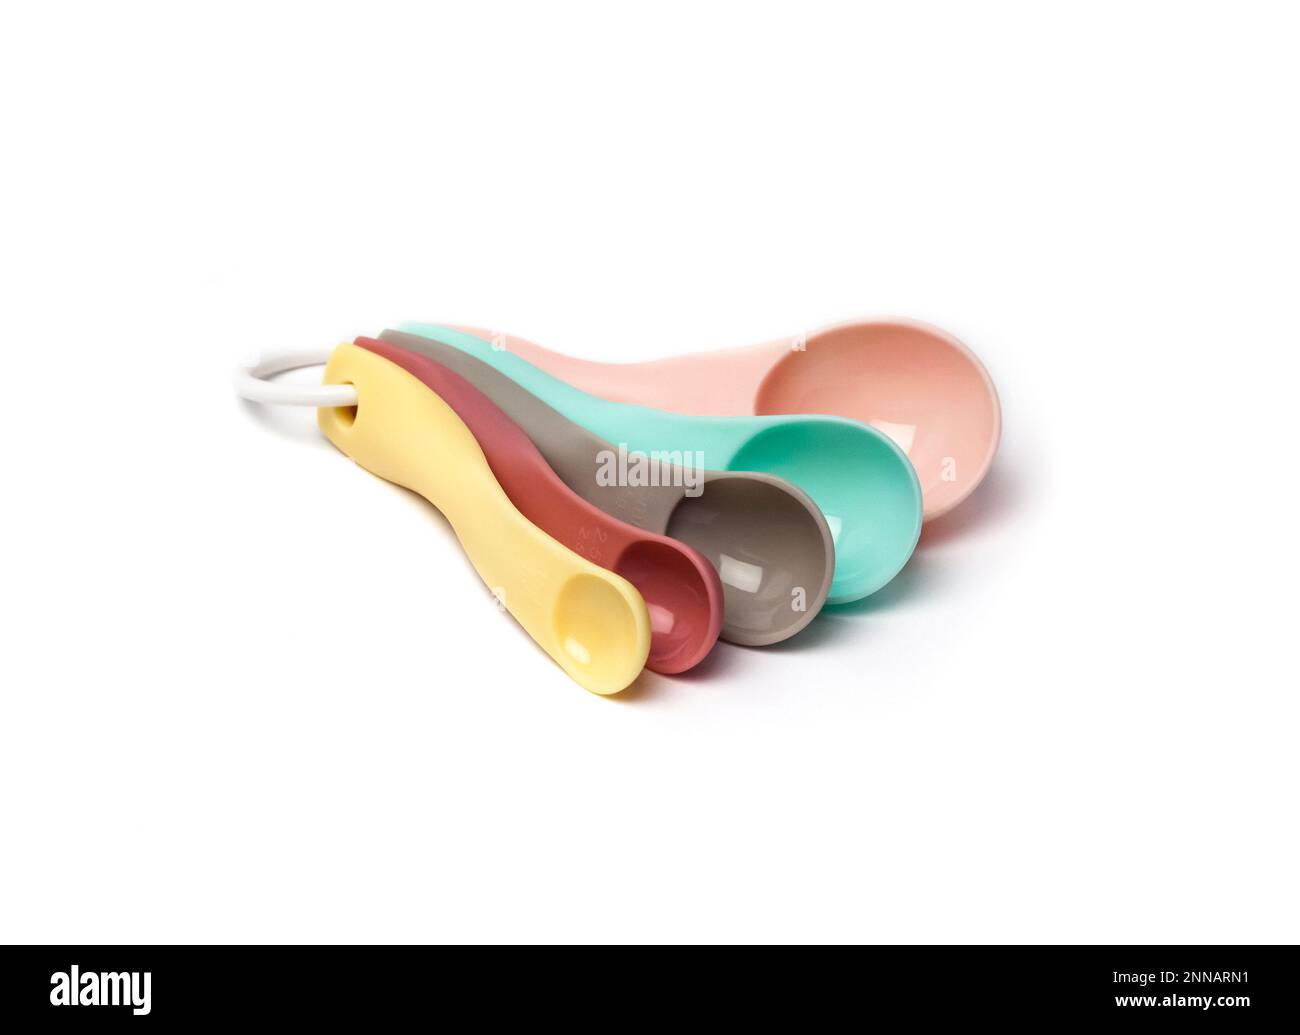 https://c8.alamy.com/comp/2NNARN1/set-of-colorful-plastic-measuring-spoon-isolated-on-white-background-2NNARN1.jpg